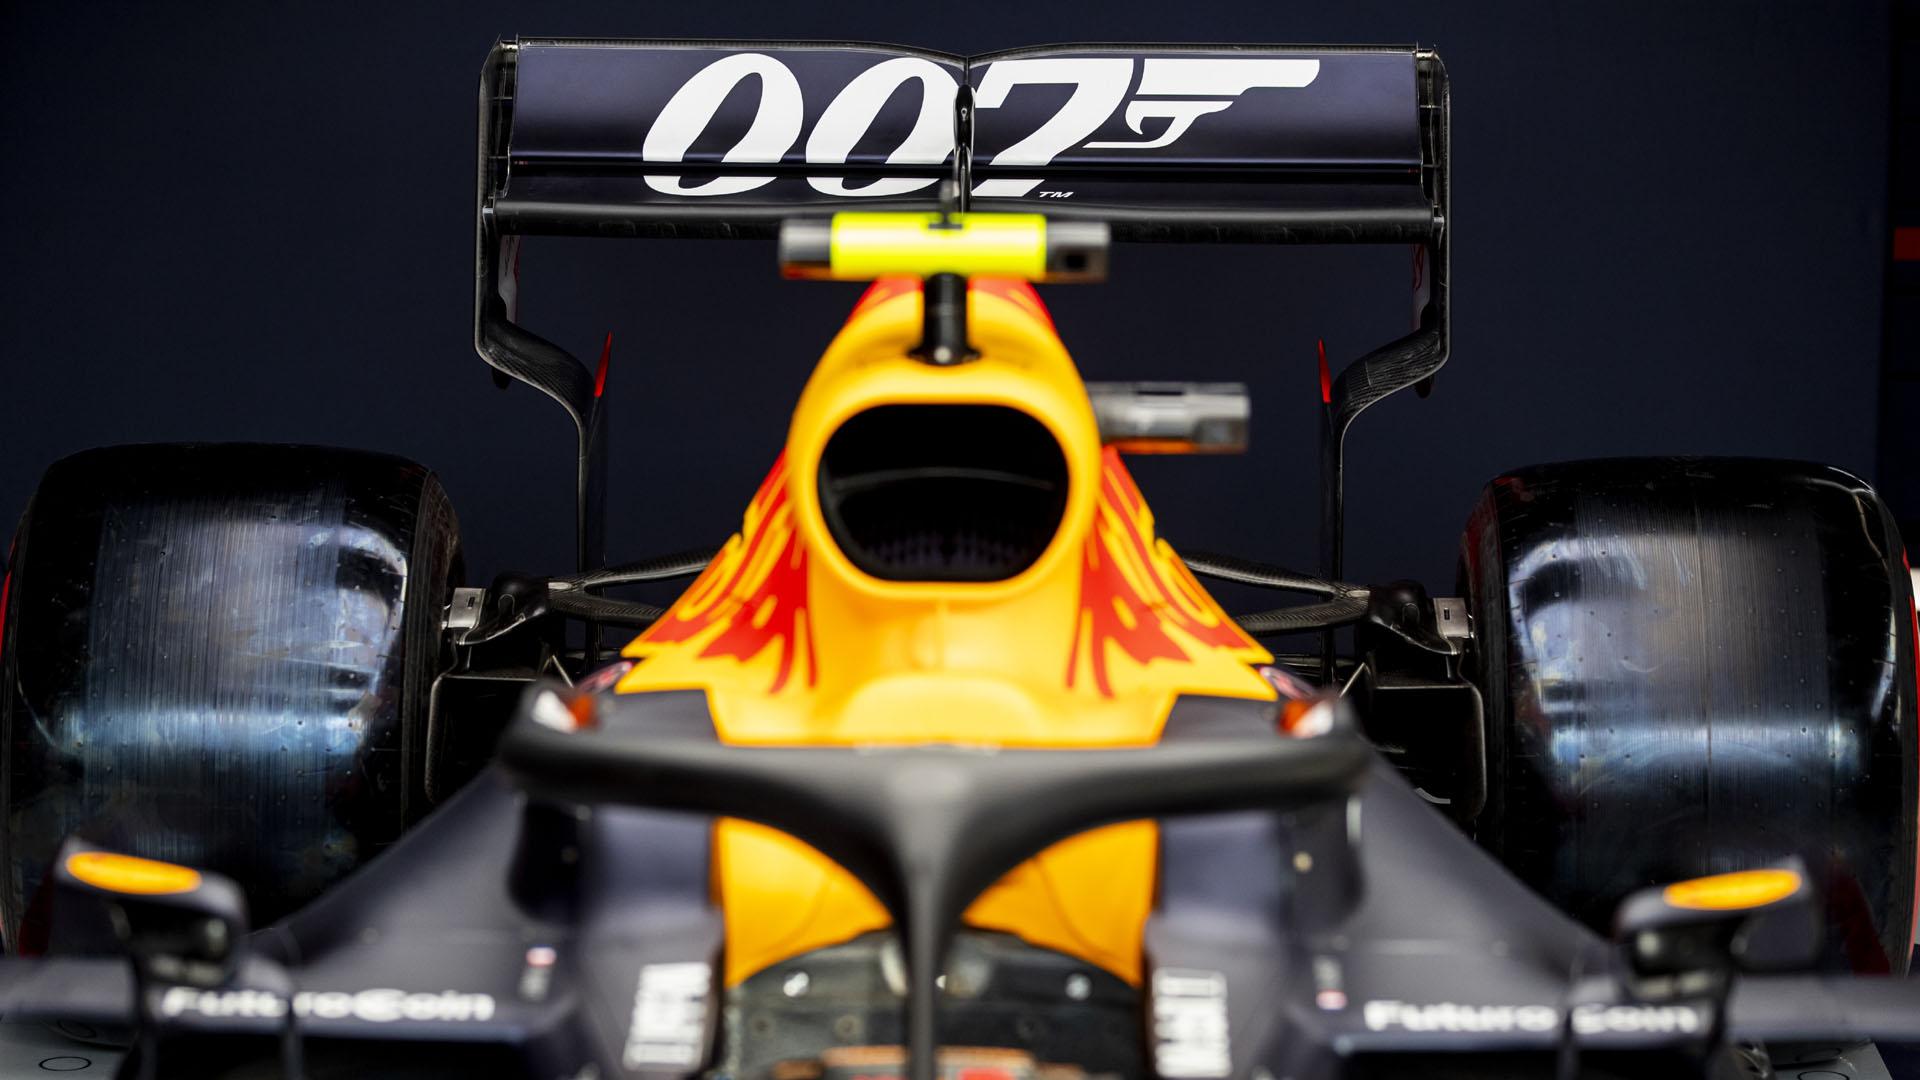 Red Bull to celebrate Bond with special Silverstone livery